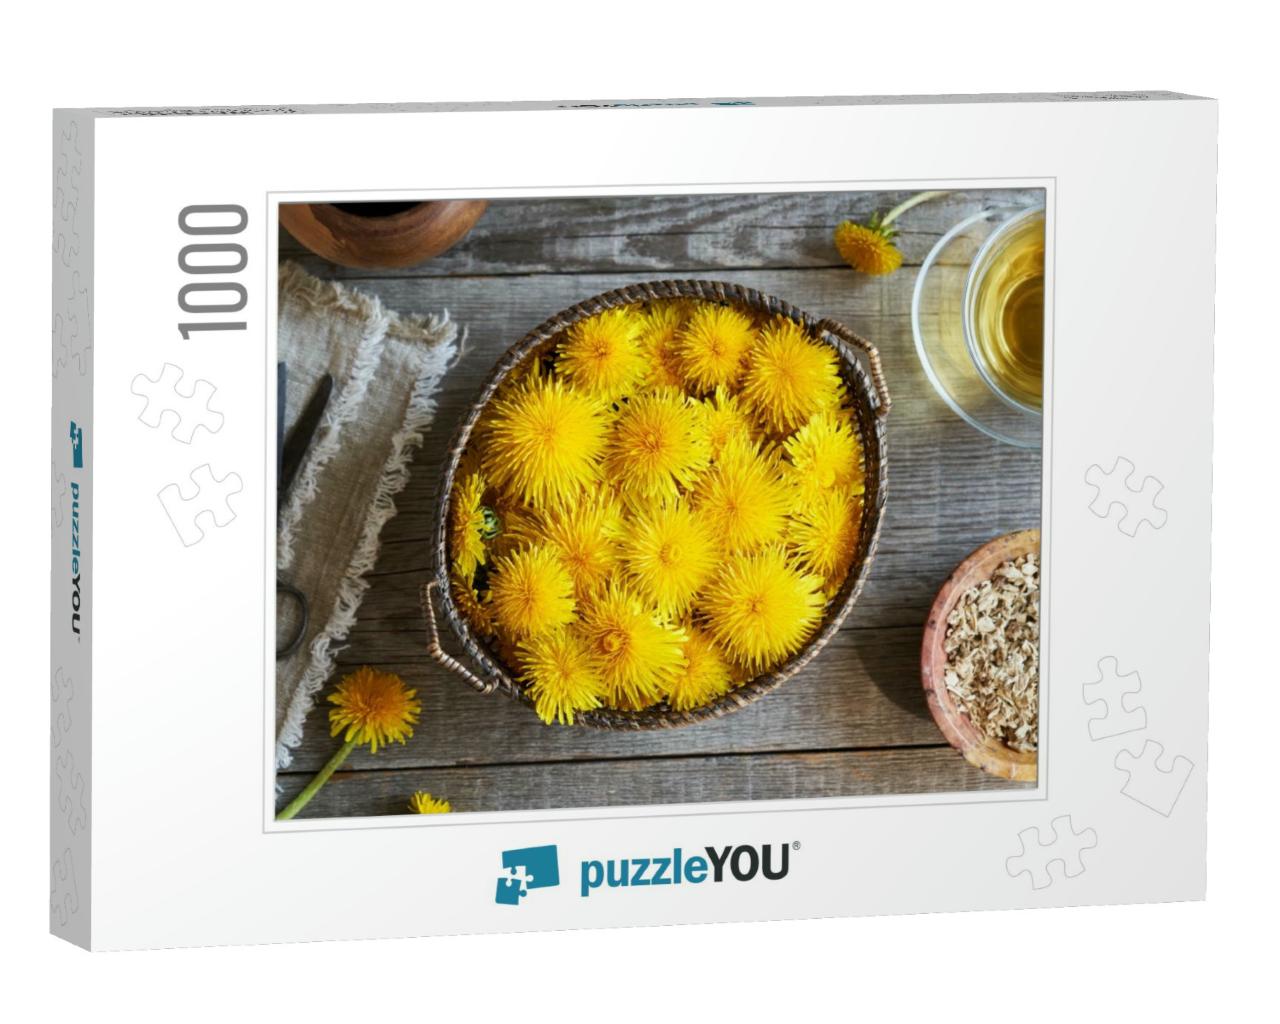 Fresh Dandelion Flowers in a Basket on a Table with Dried... Jigsaw Puzzle with 1000 pieces